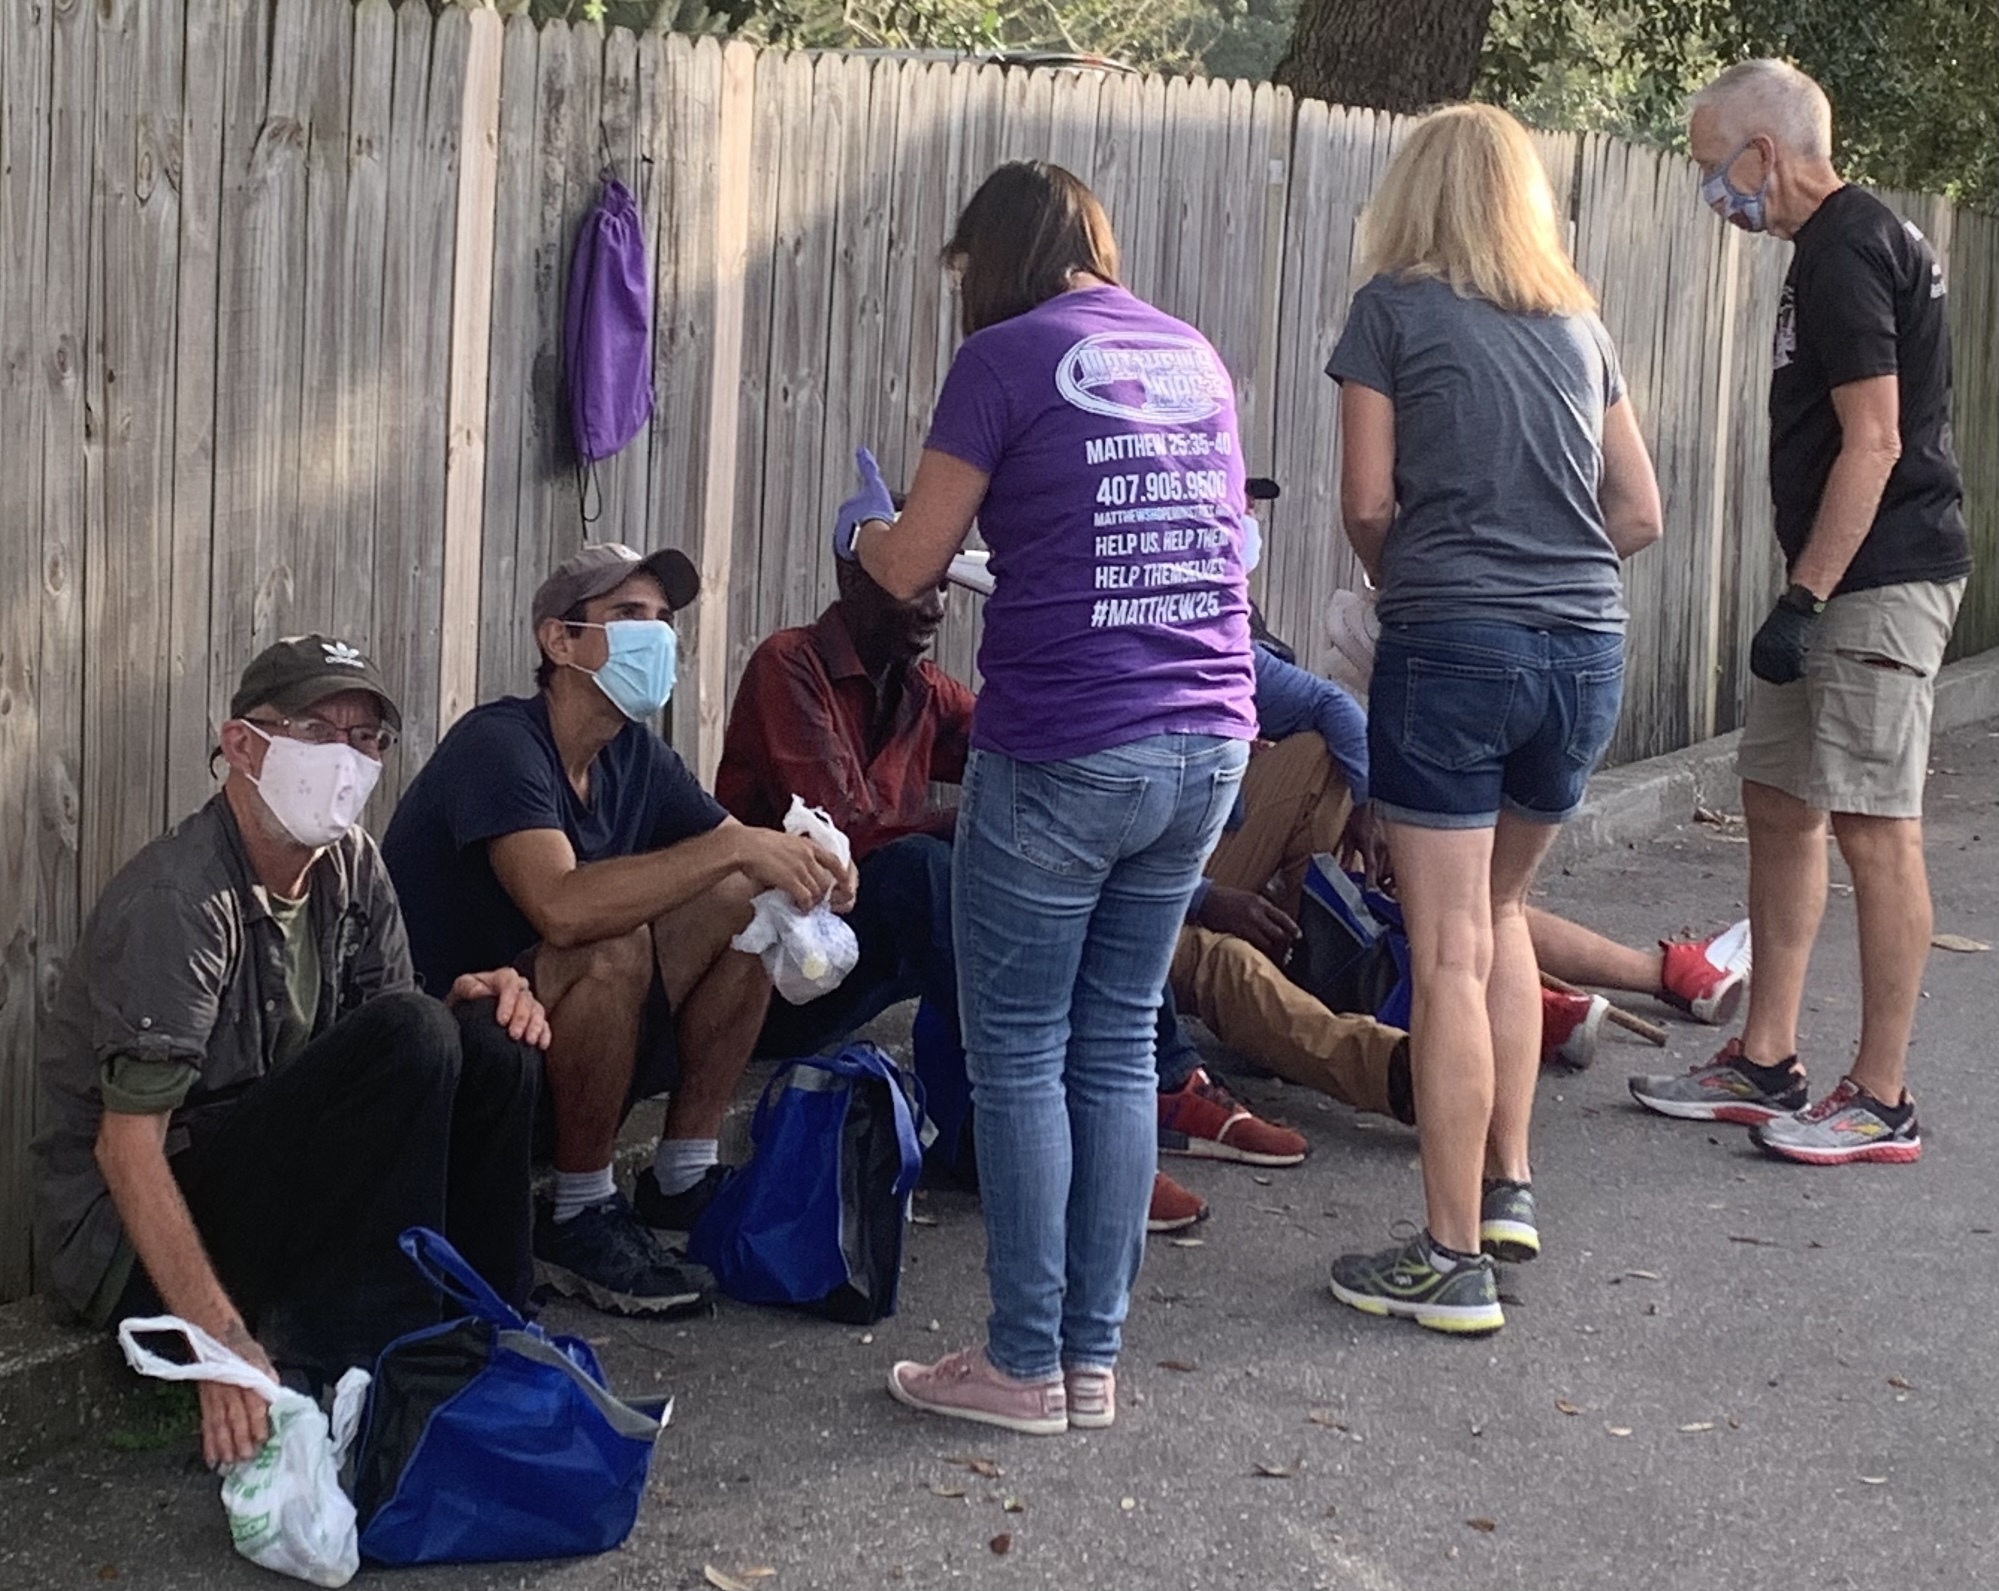 Matthew’s Hope staff and volunteers go into the woods and to the various homeless camps each Tuesday and Thursday to provide food, clothing and hygiene items; medical and mental health services; and more.